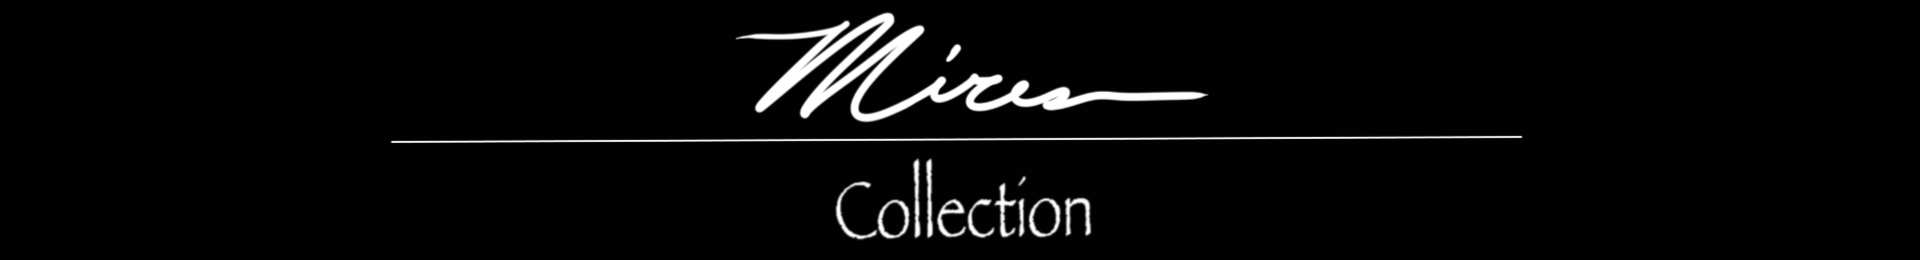 Mires Collection banner